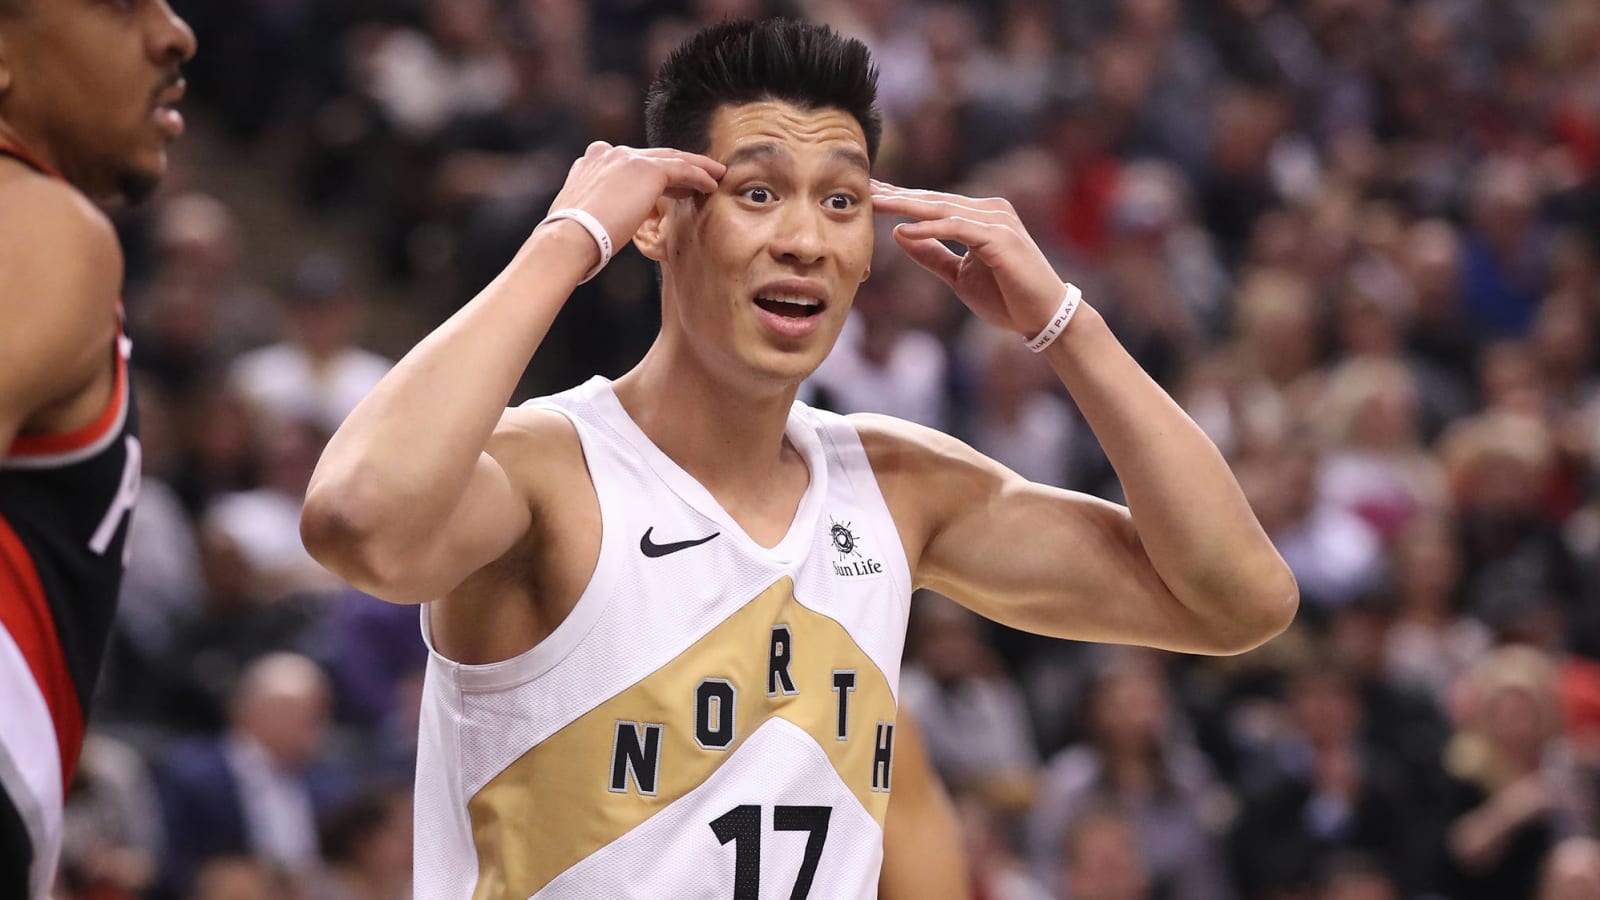 Watch: Jeremy Lin, in tears, says 'the NBA's kind of given up on me'